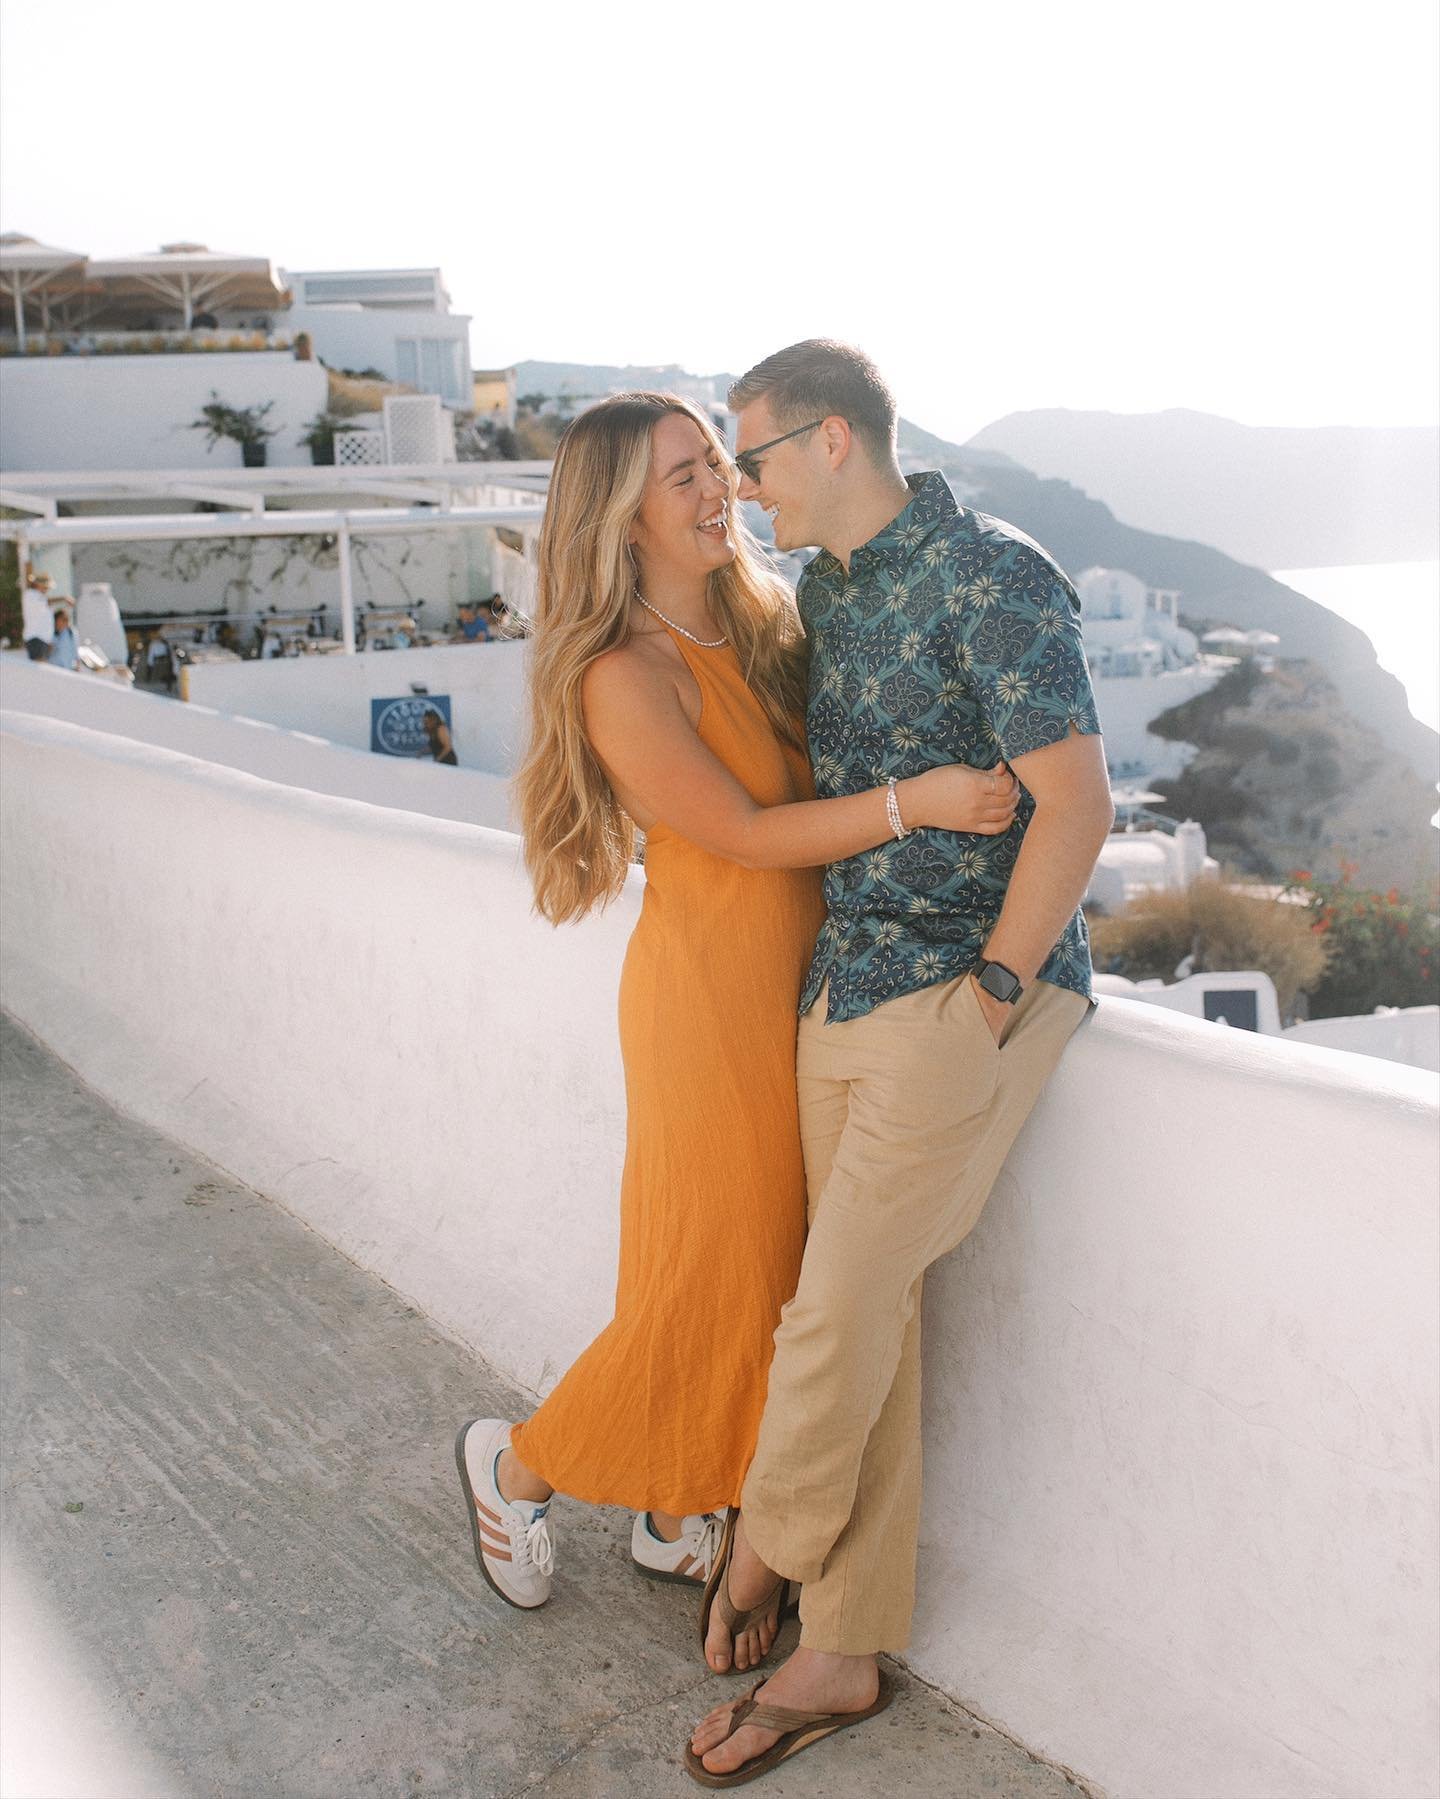 Greece pt 1. This trip was at the top of our travel list since we moved to Germany. It seemed like the perfect way to end our last summer living in Europe🥲